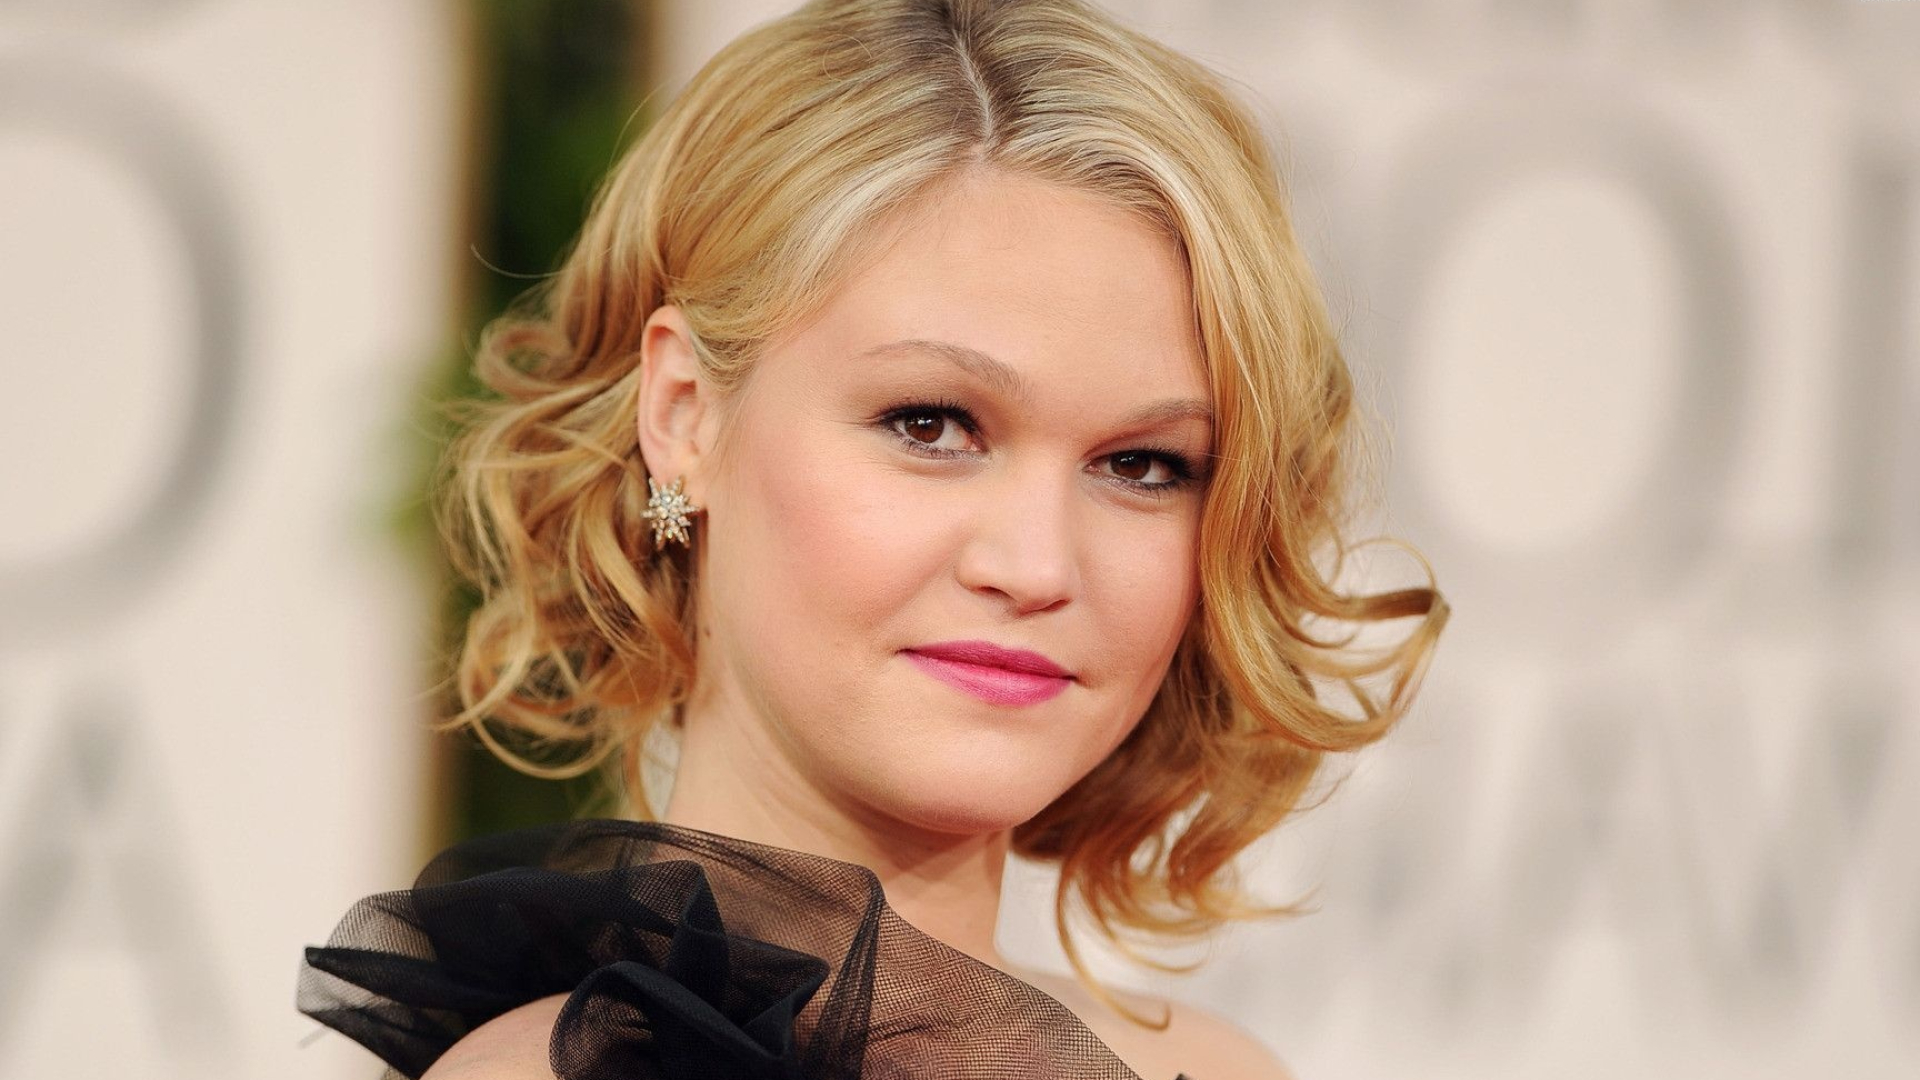 Julia Stiles wallpapers, High quality images, Celebrities, Famous actress, 1920x1080 Full HD Desktop